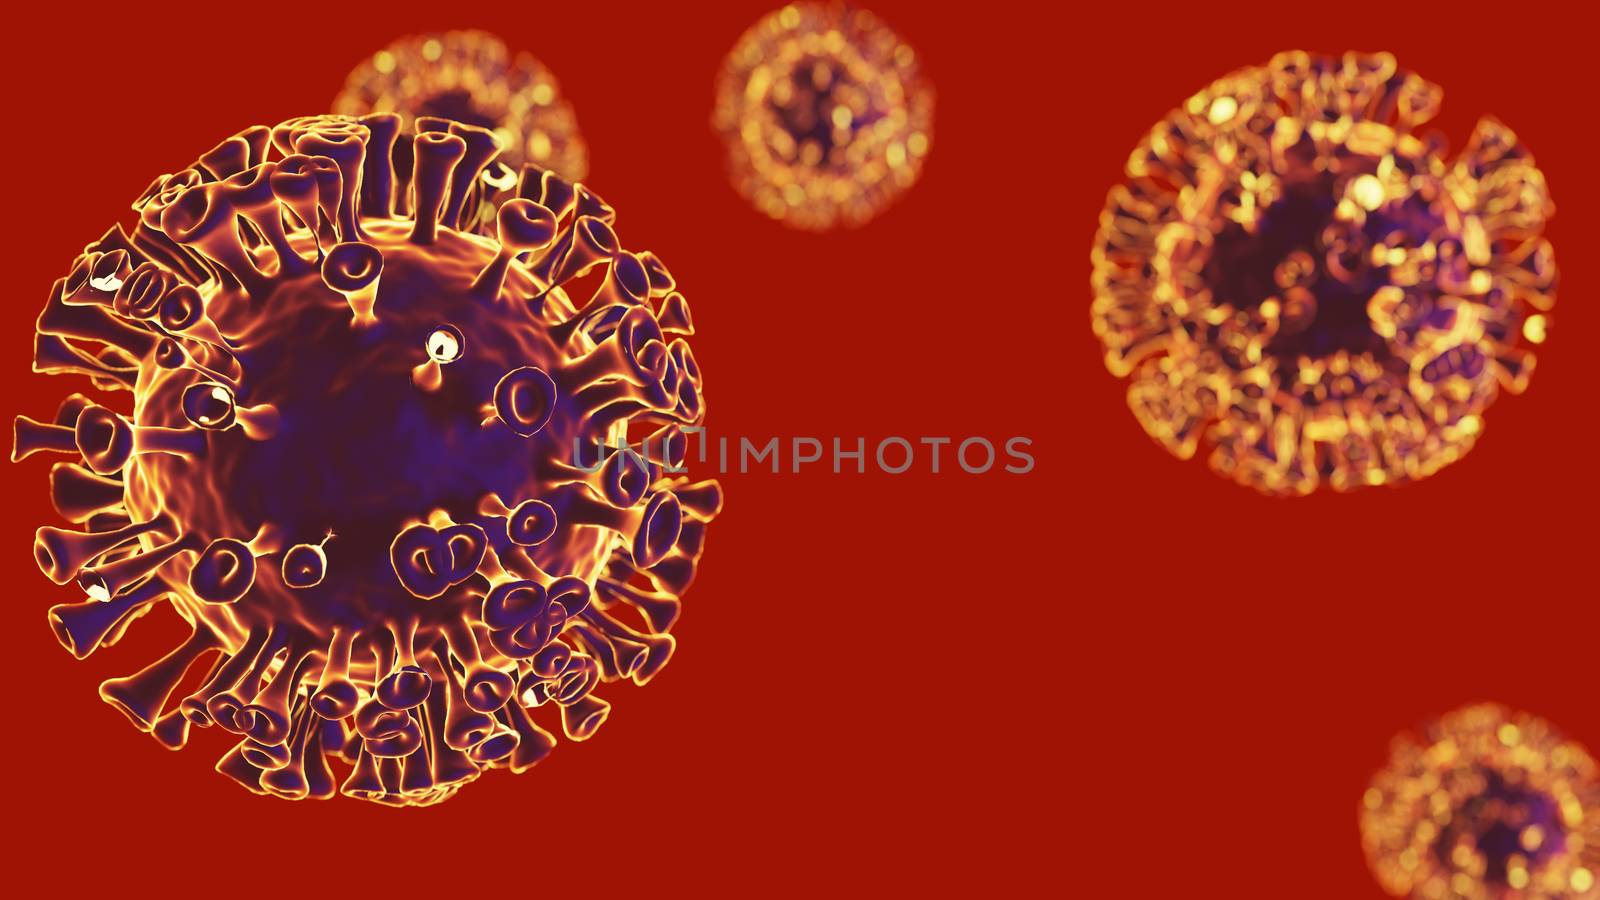 Illustration of corona viruses, covid-19 on red background. Contagion and propagation of a disease. 3D illustration.